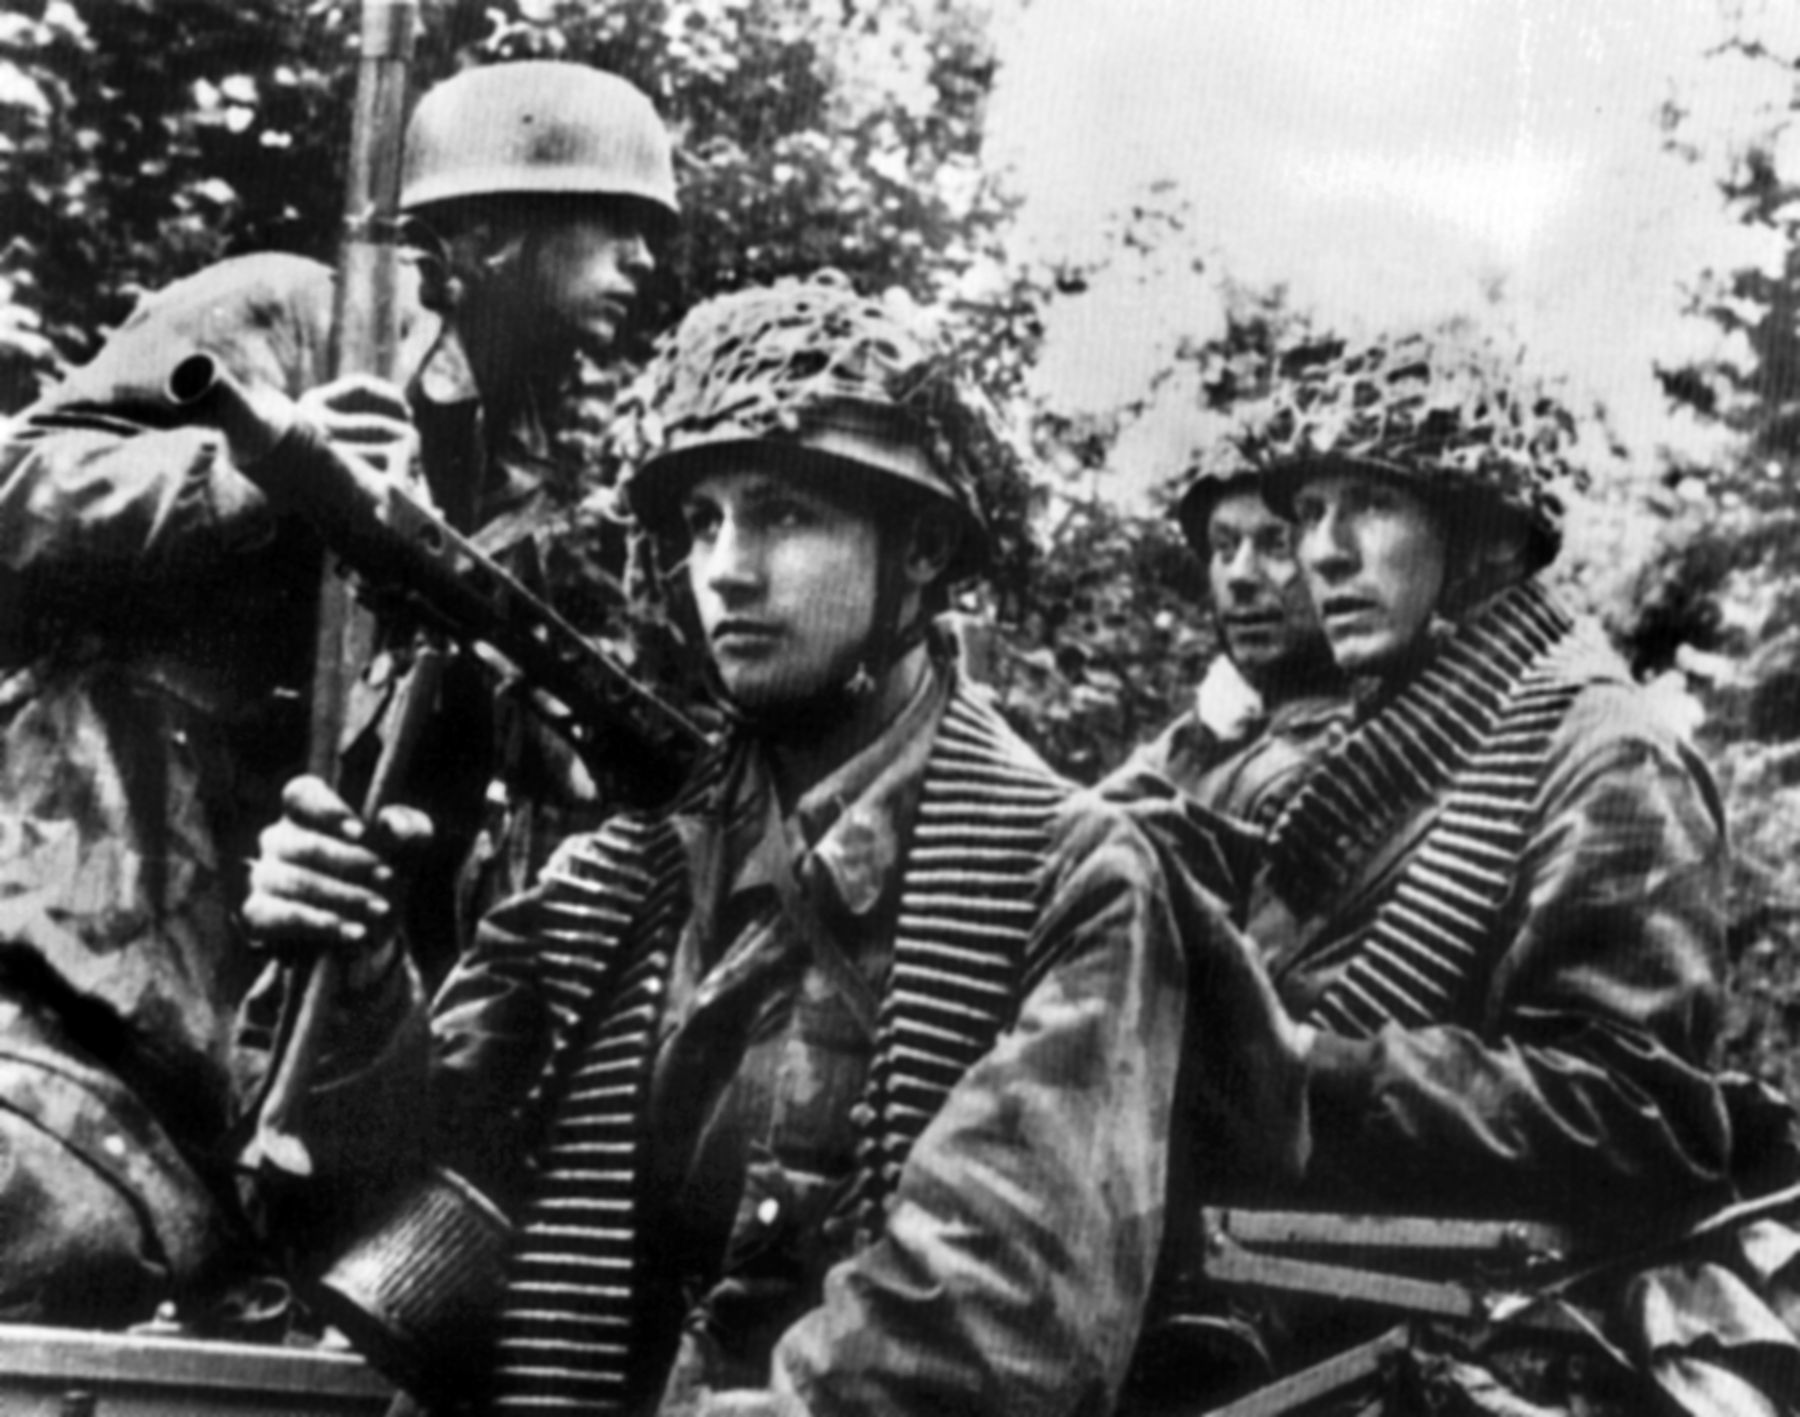 With belts of 7.92mm ammunition around their necks, this MG42 team from von der Heydte’s 6th Fallschirmjager Regiment prepares to move out against 506th PIR units that have dropped into the area. 